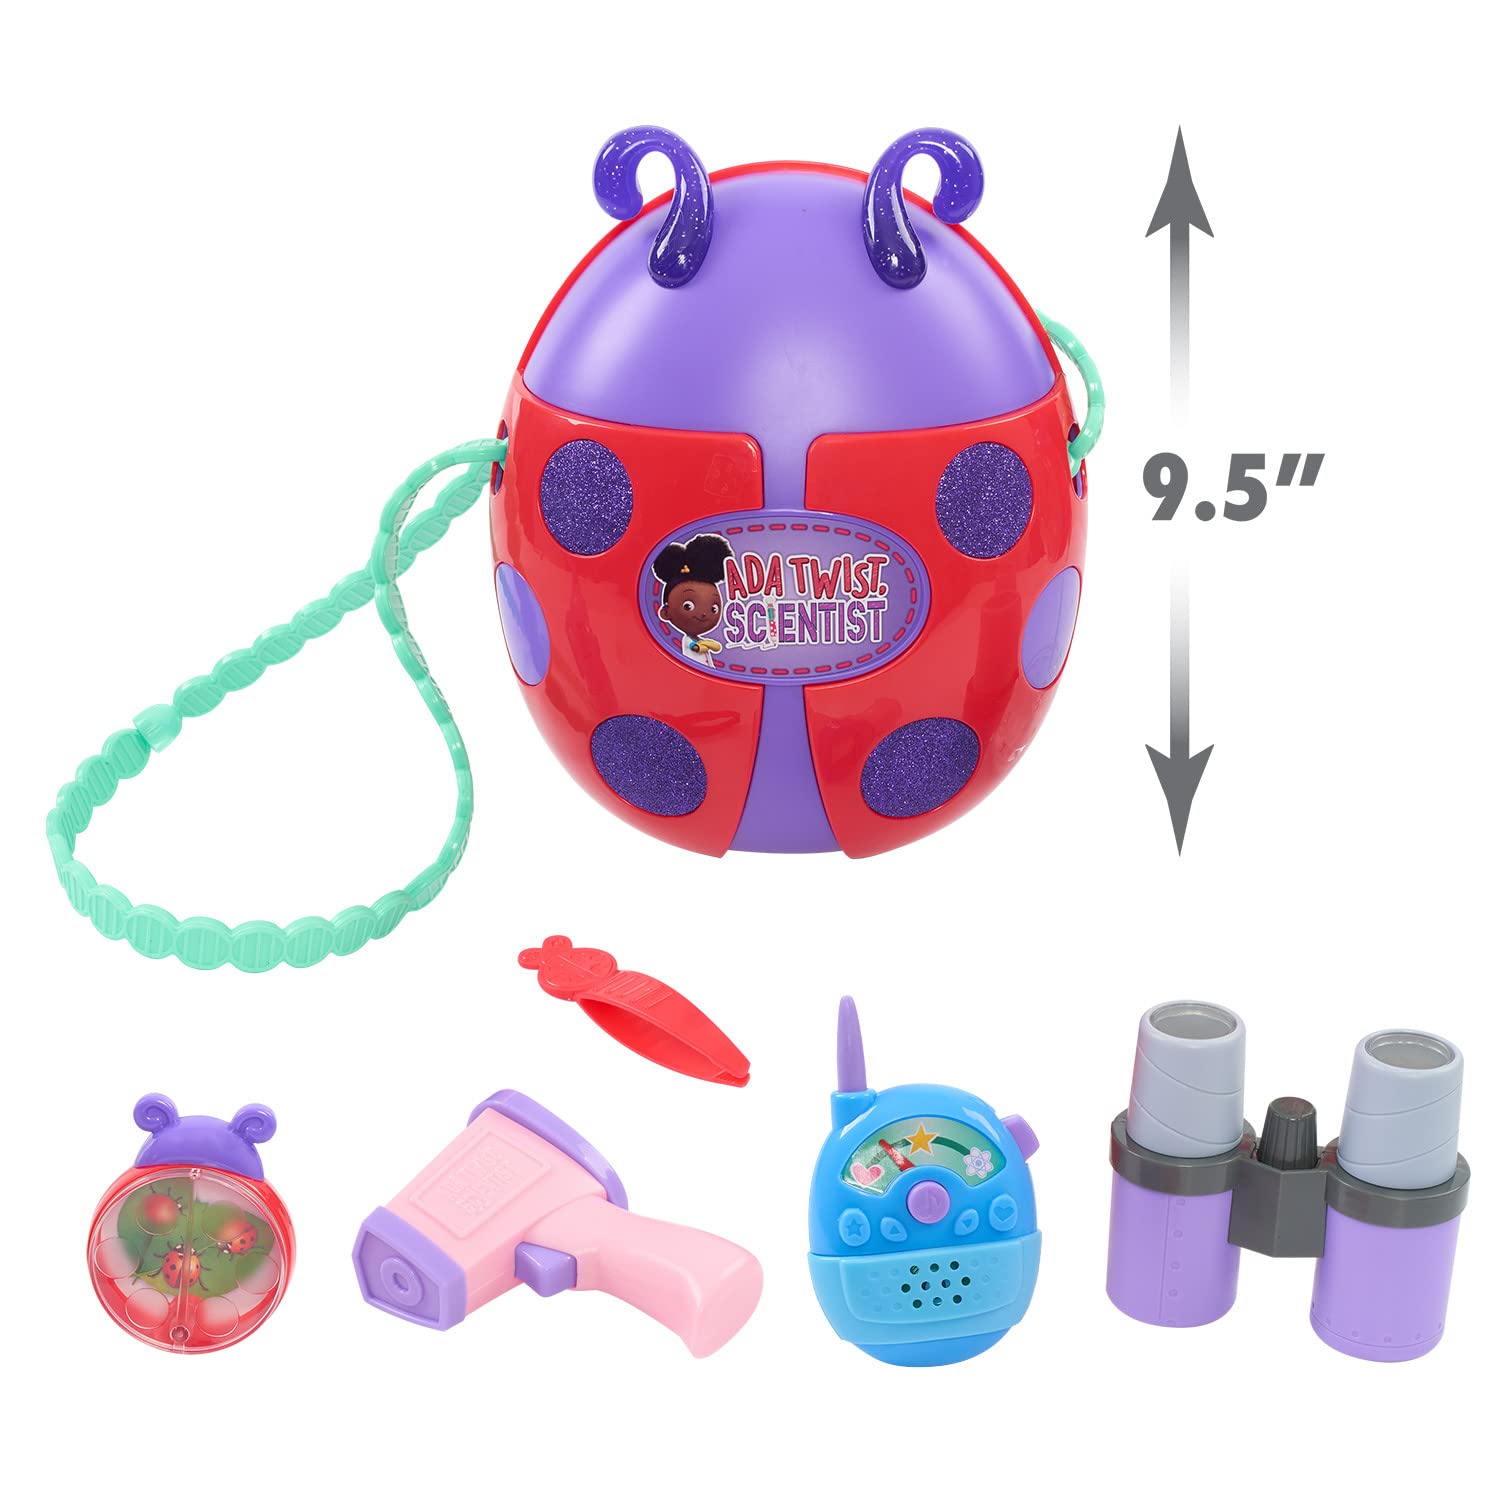 Ada Twist Bag Set, Dress Up & Pretend Play, Kids Toys for Ages 3 Up, Gifts and Presents by Just Play